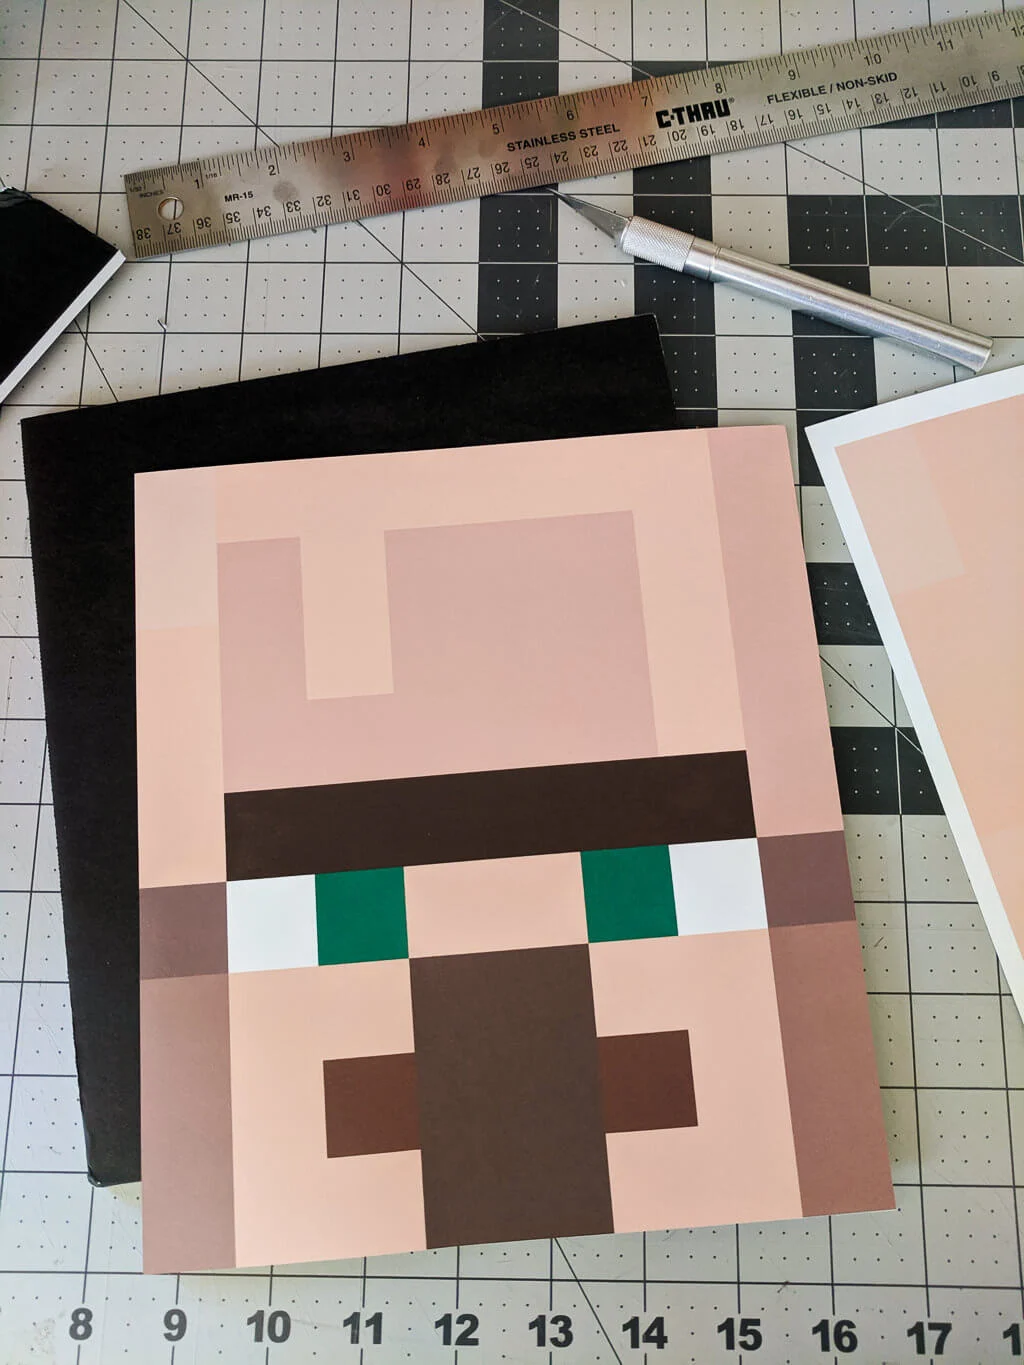 Minecraft Halloween Costume Diy Villager Head Printable For Halloween Or A Minecraft Party Merriment Design